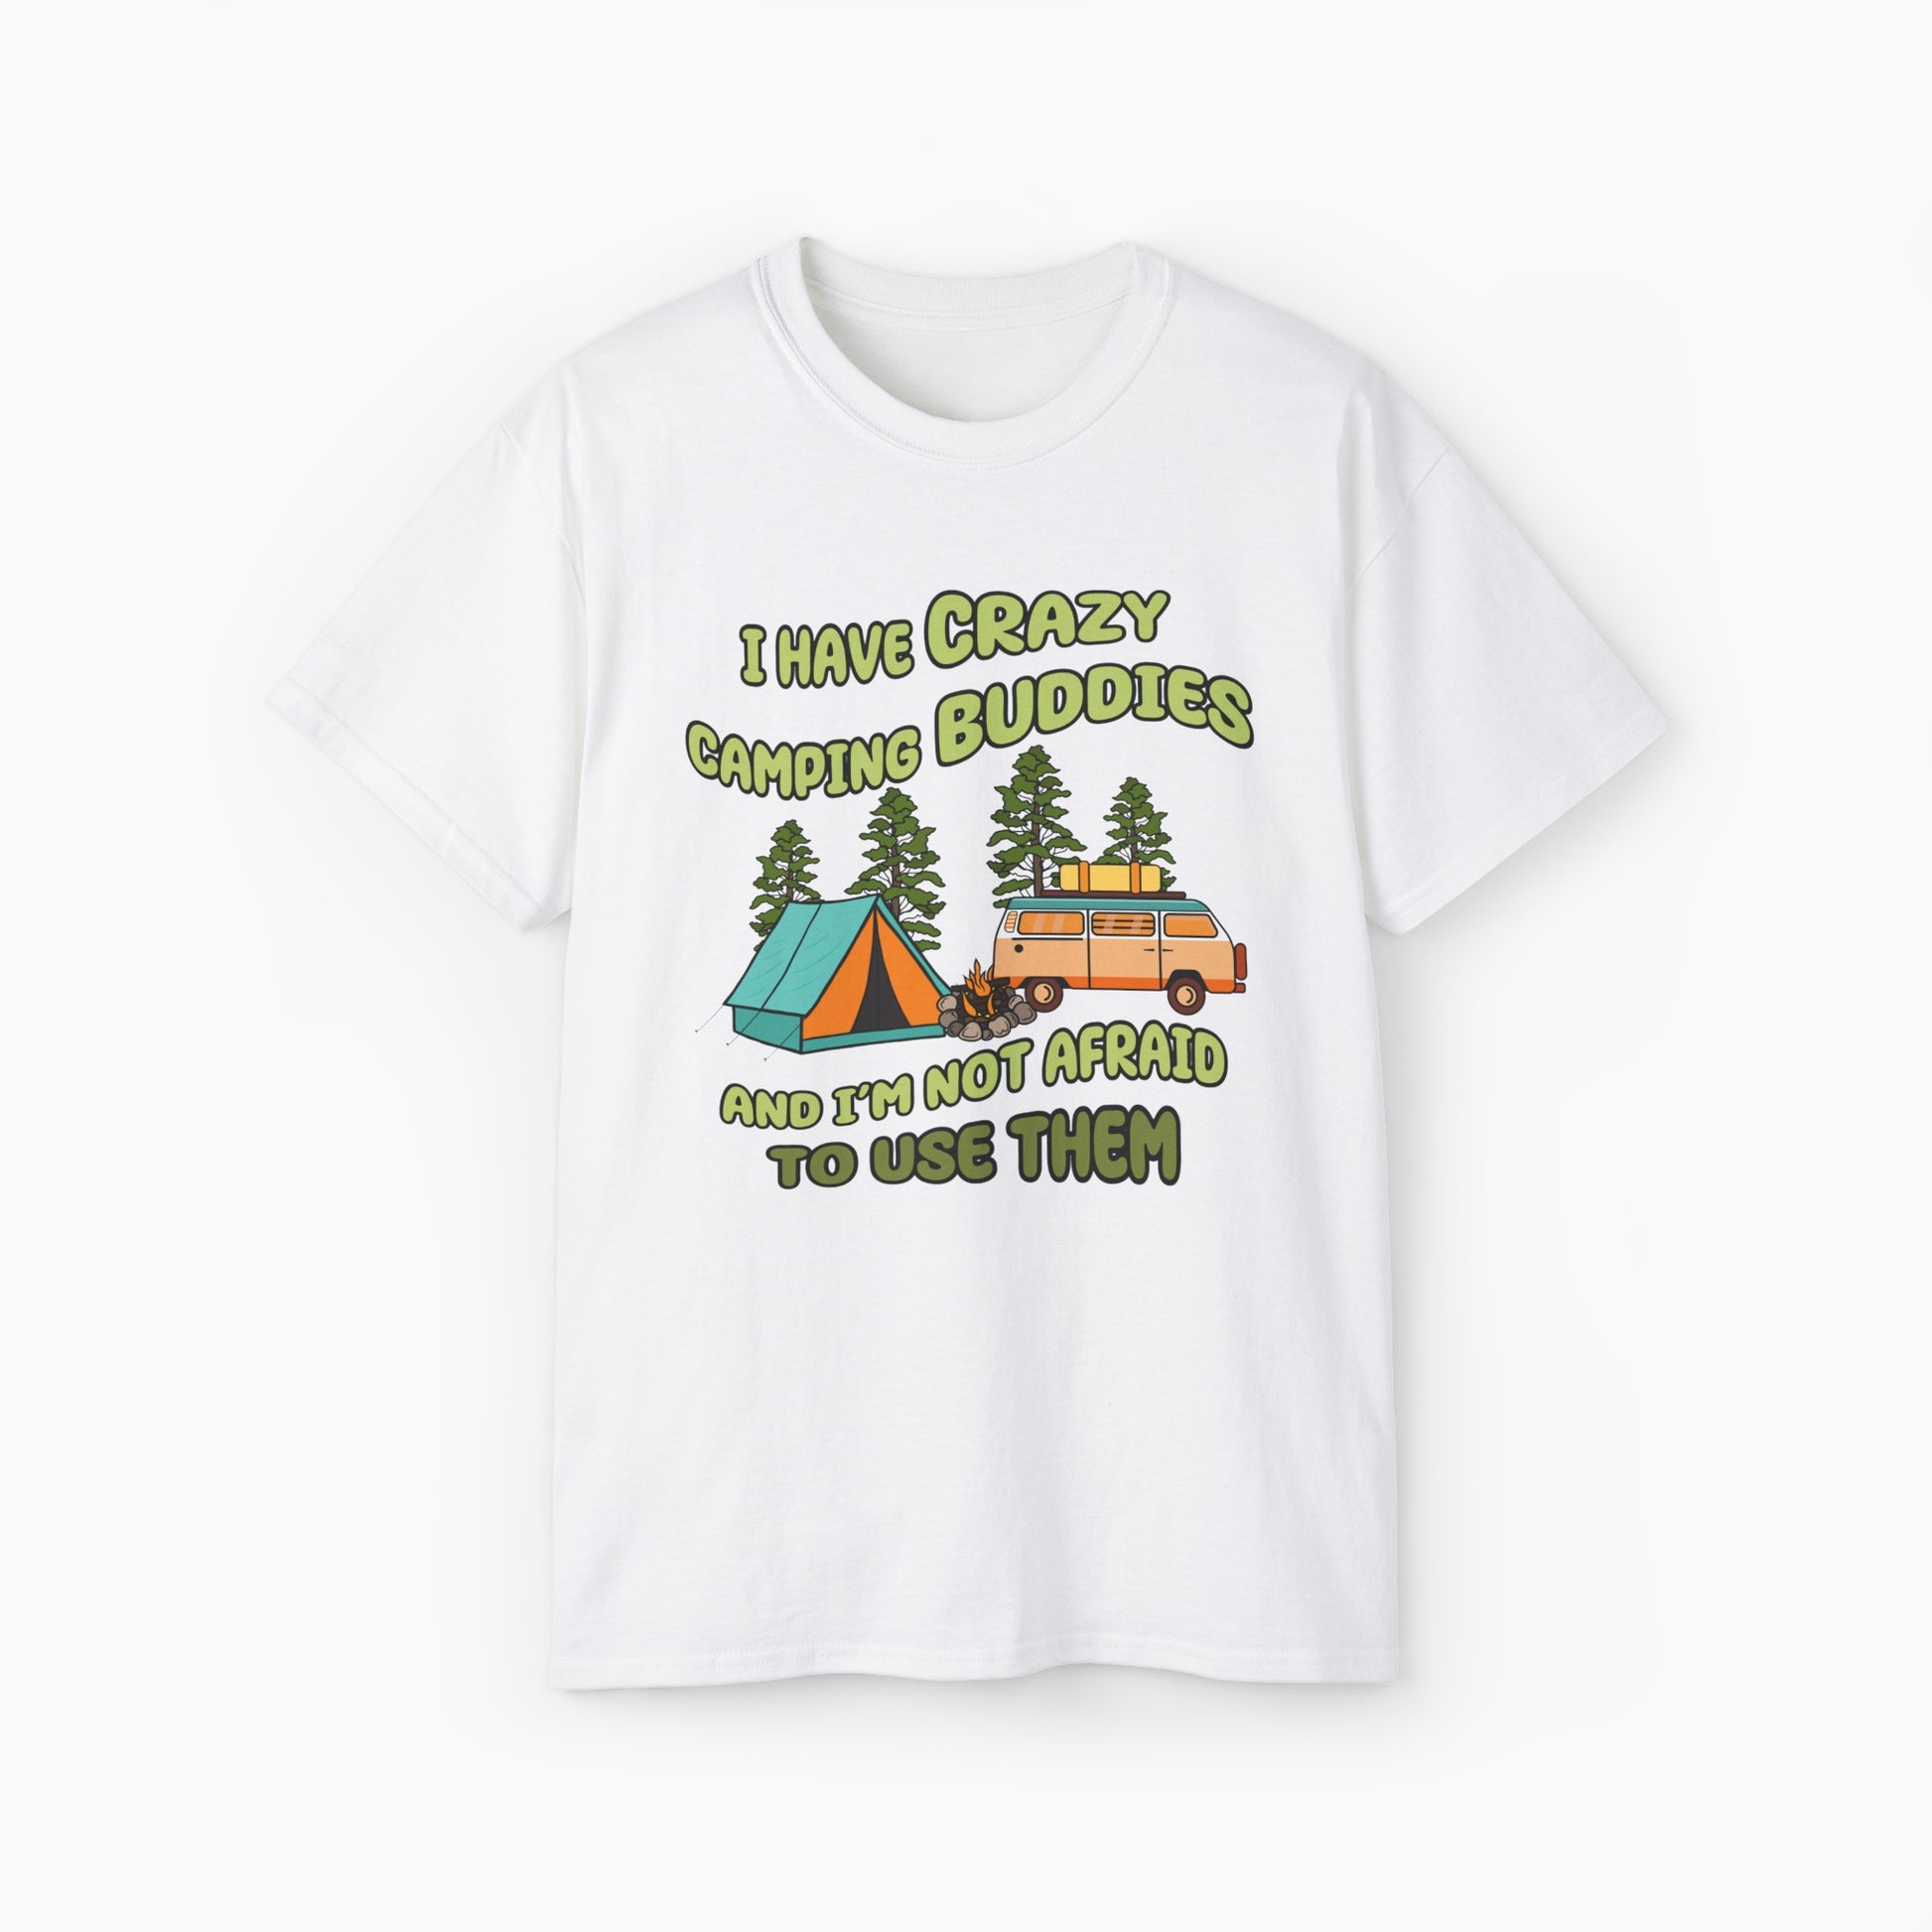 White t-shirt with the text 'I have crazy camping buddies and I am not afraid to use them,' featuring a camping van, campfire, trees, and a tent."